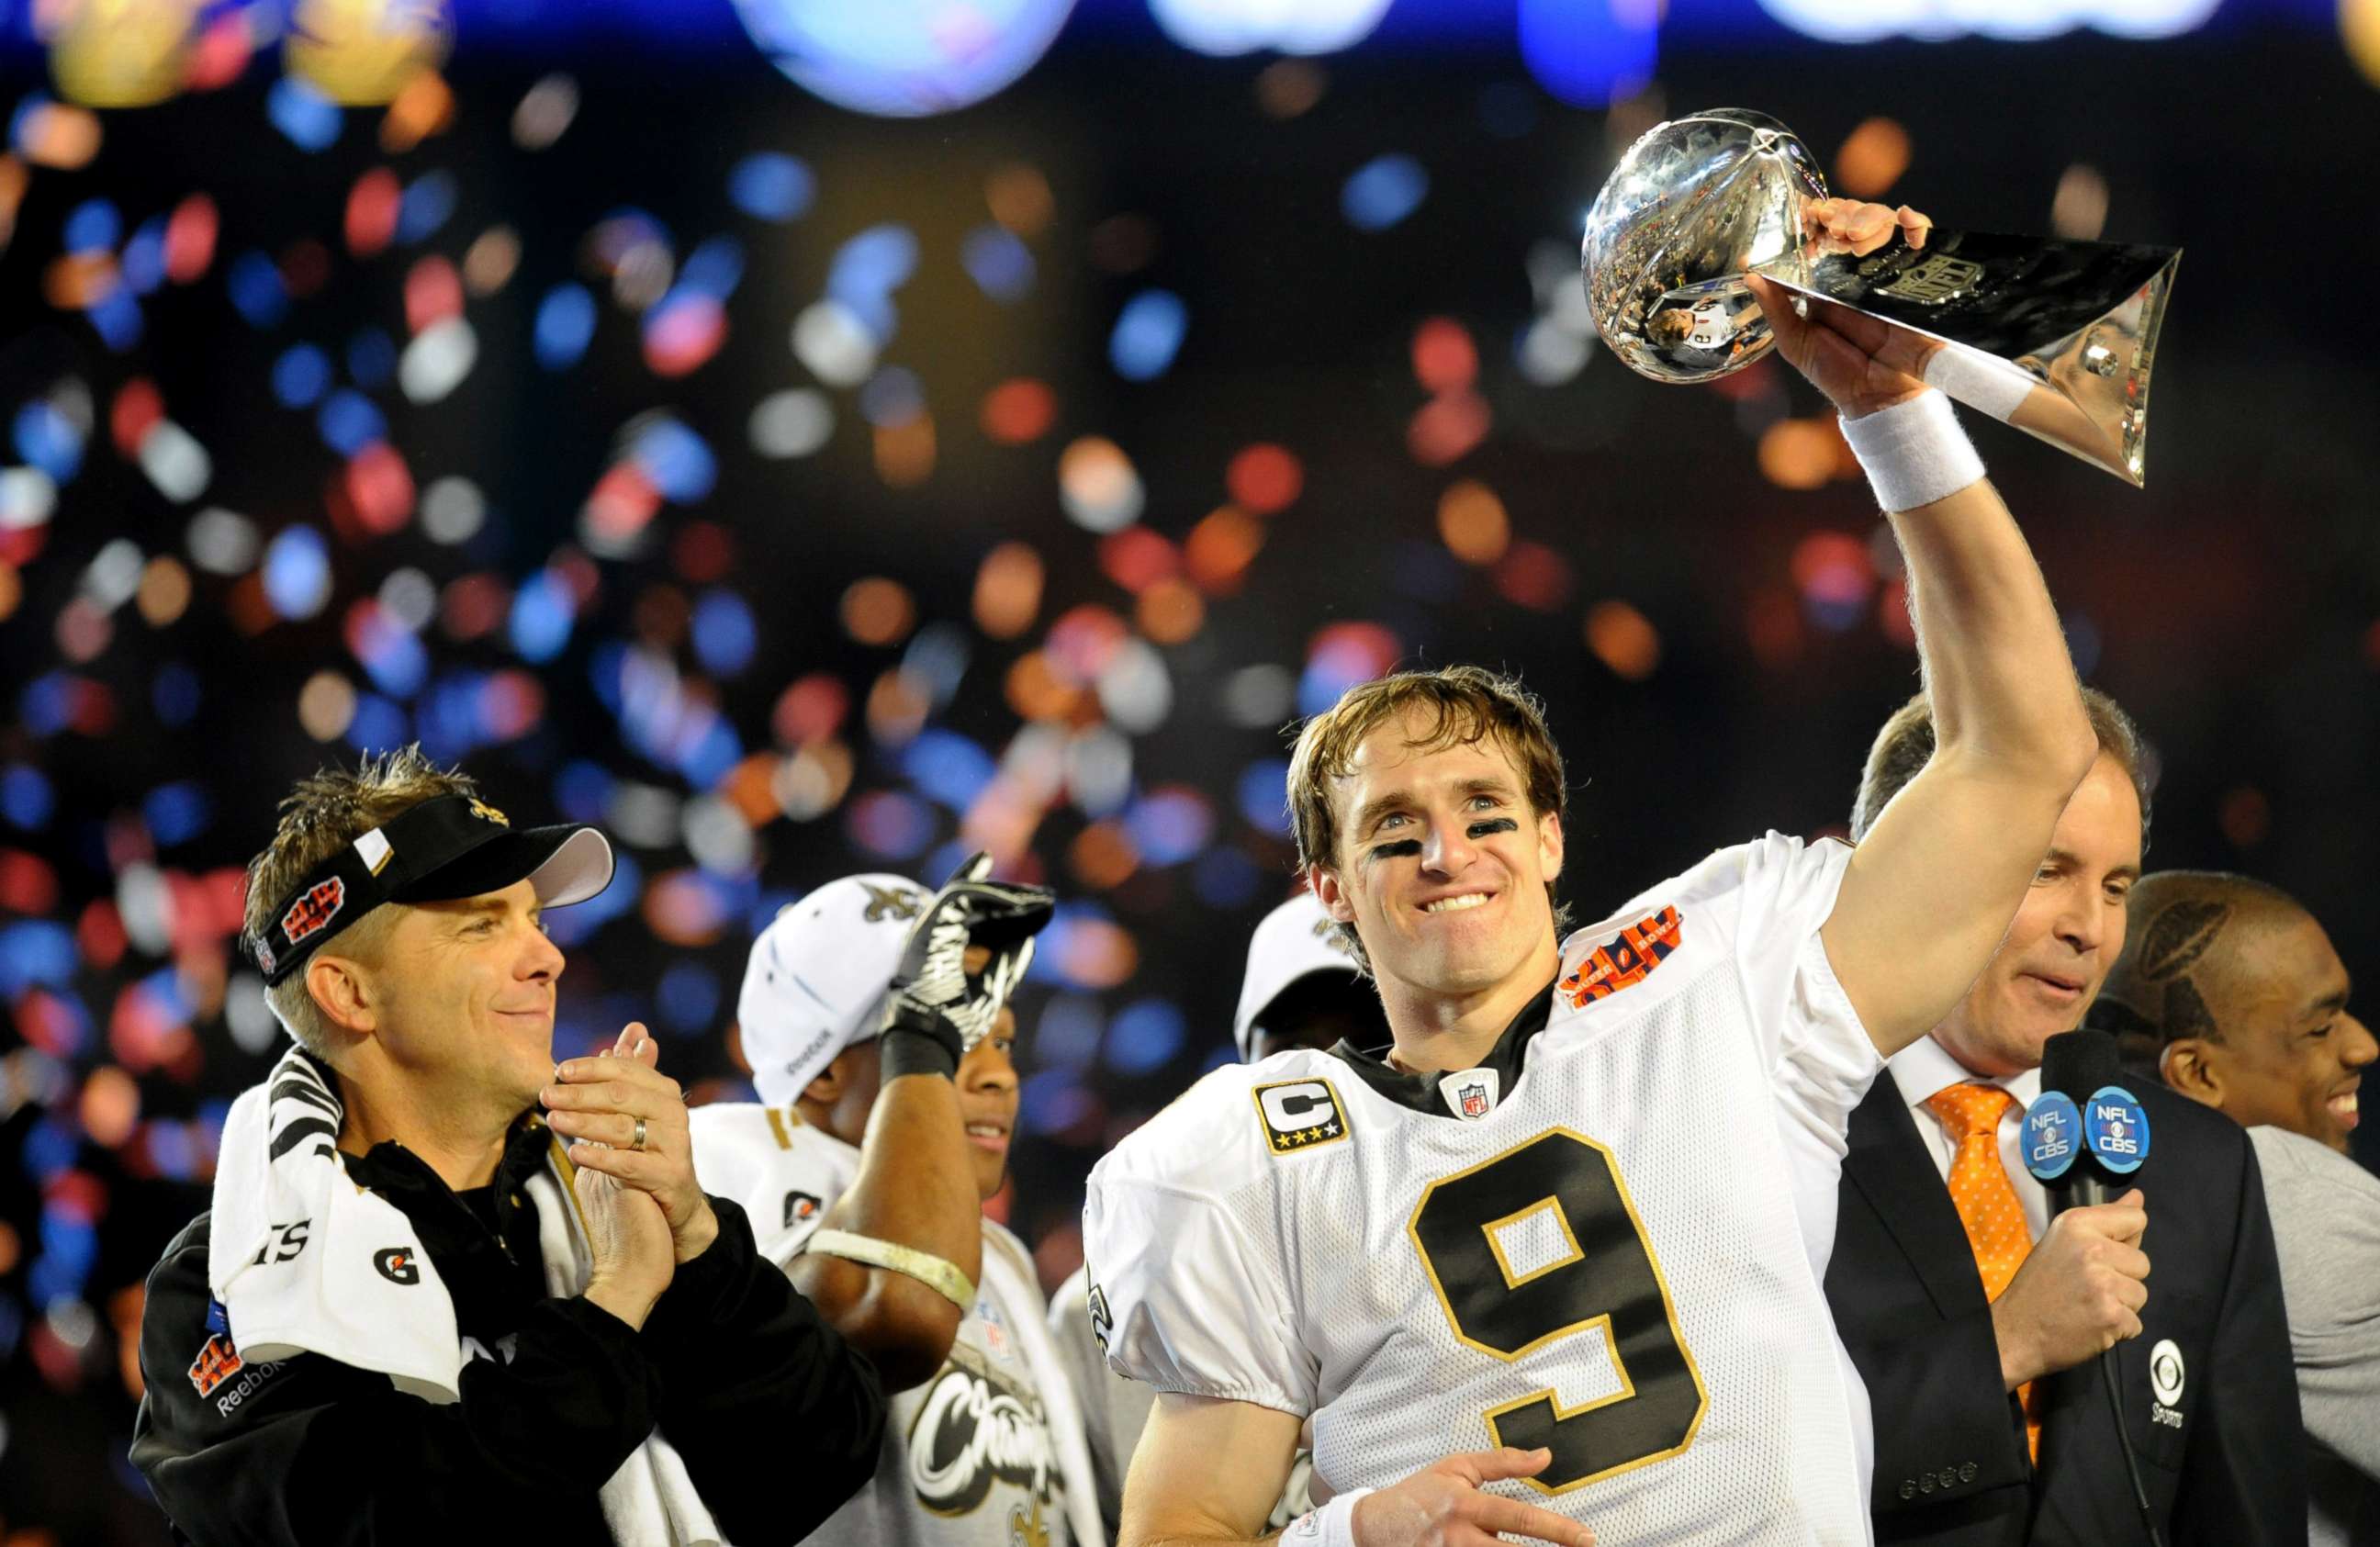 PHOTO: Drew Brees of the New Orleans Saints holds up the Vince Lombardi Trophy on the podium as head coach Sean Payton looks on after defeating the Indianapolis Colts in Super Bowl XLIV, Feb. 7, 2010, at Sun Life Stadium in Miami Gardens, Florida.